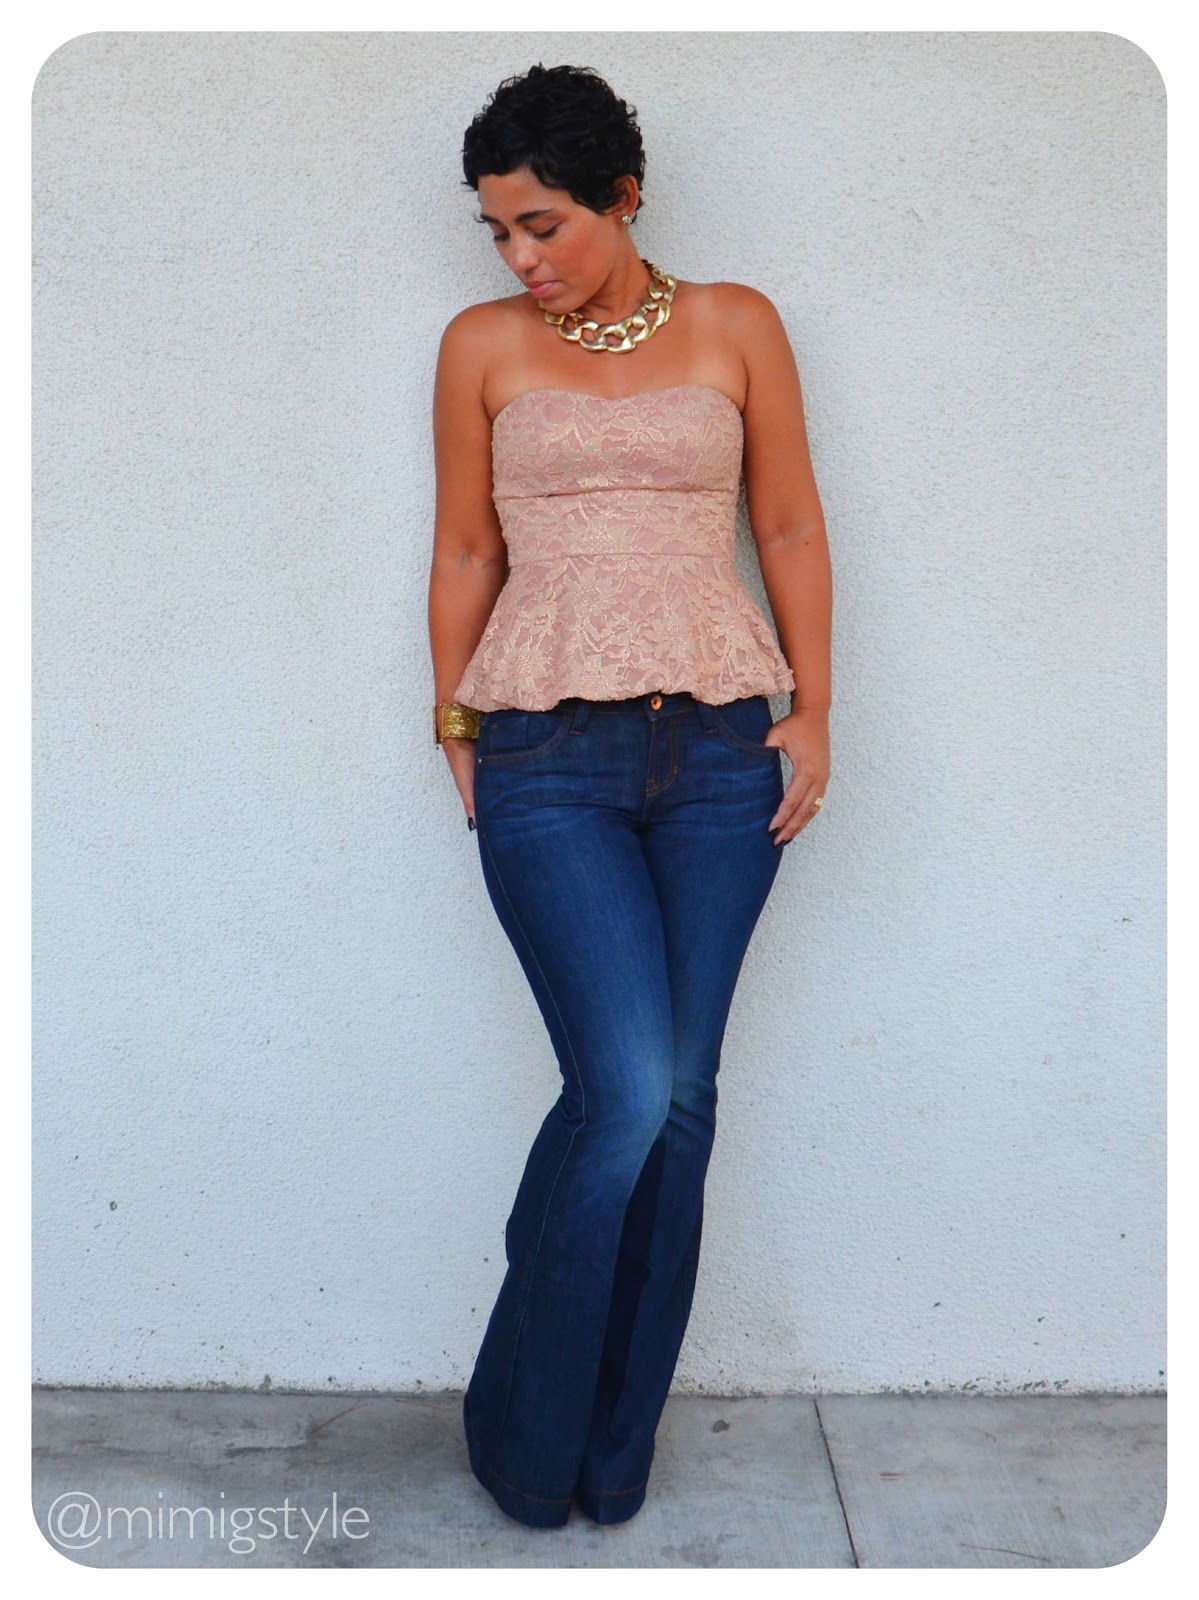 OOTD: Denim + Lace On Date Night |Fashion, Lifestyle, and DIY